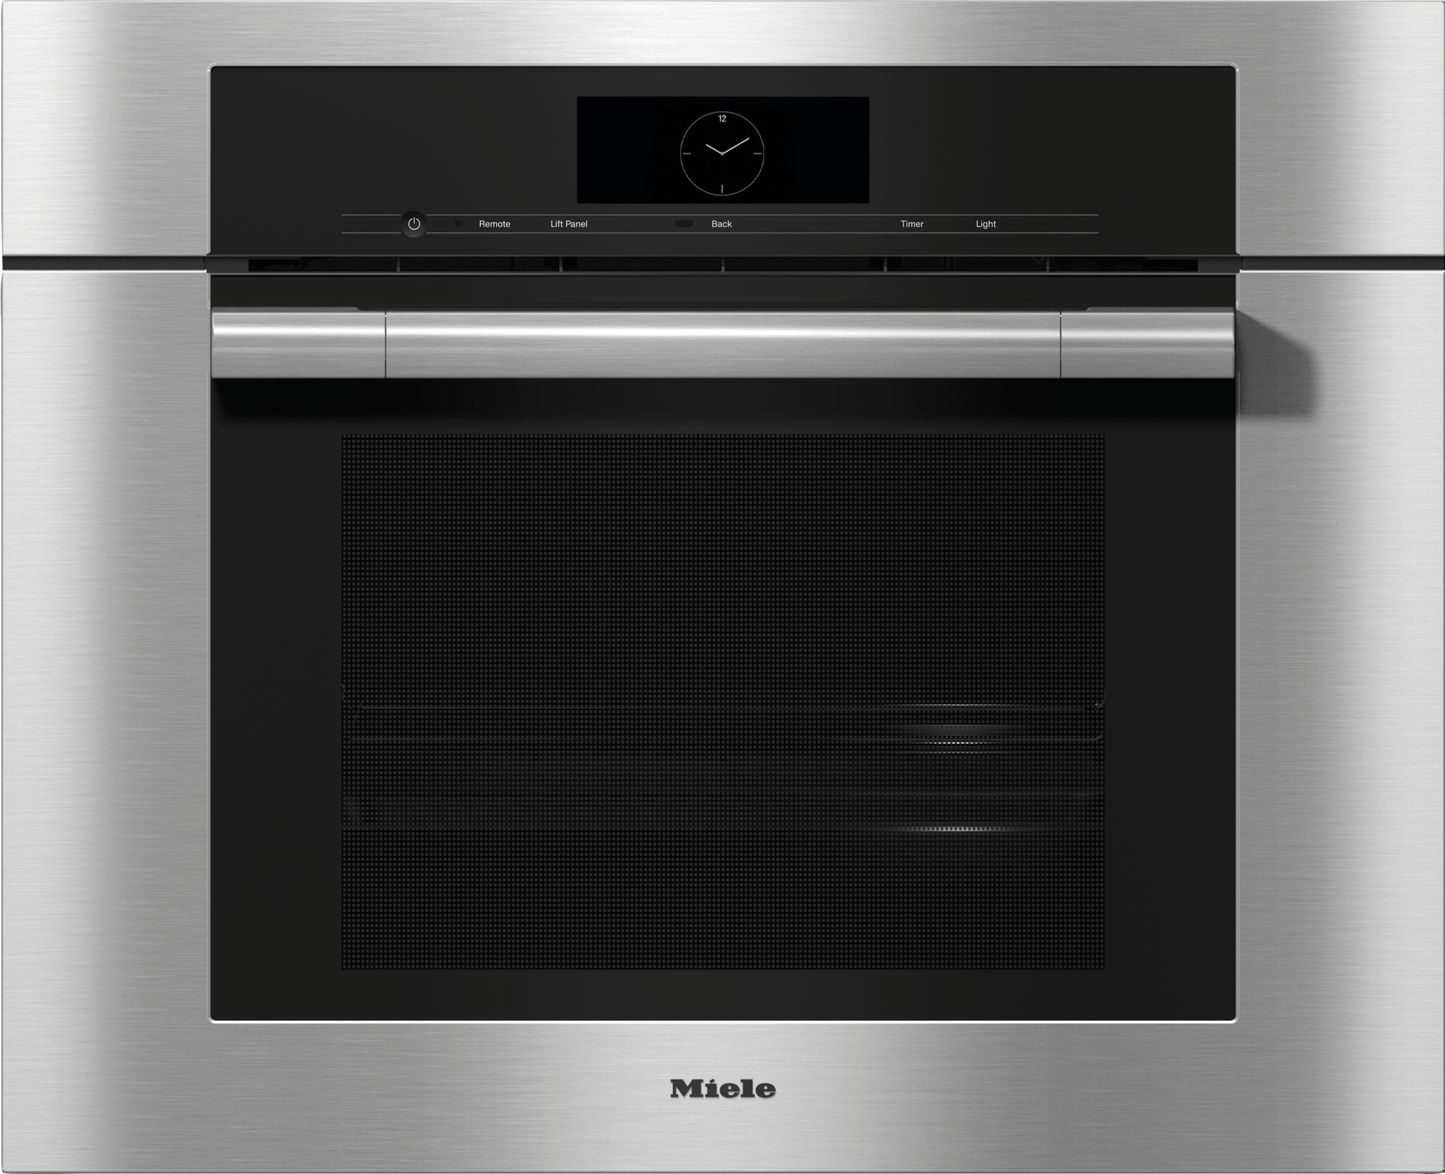 Miele DGC7785  STAINLESS STEEL 30" Combi-Steam Oven Xxl With Directwater Plus For Steam Cooking, Baking, Roasting With Roast Probe + Menu Cooking.